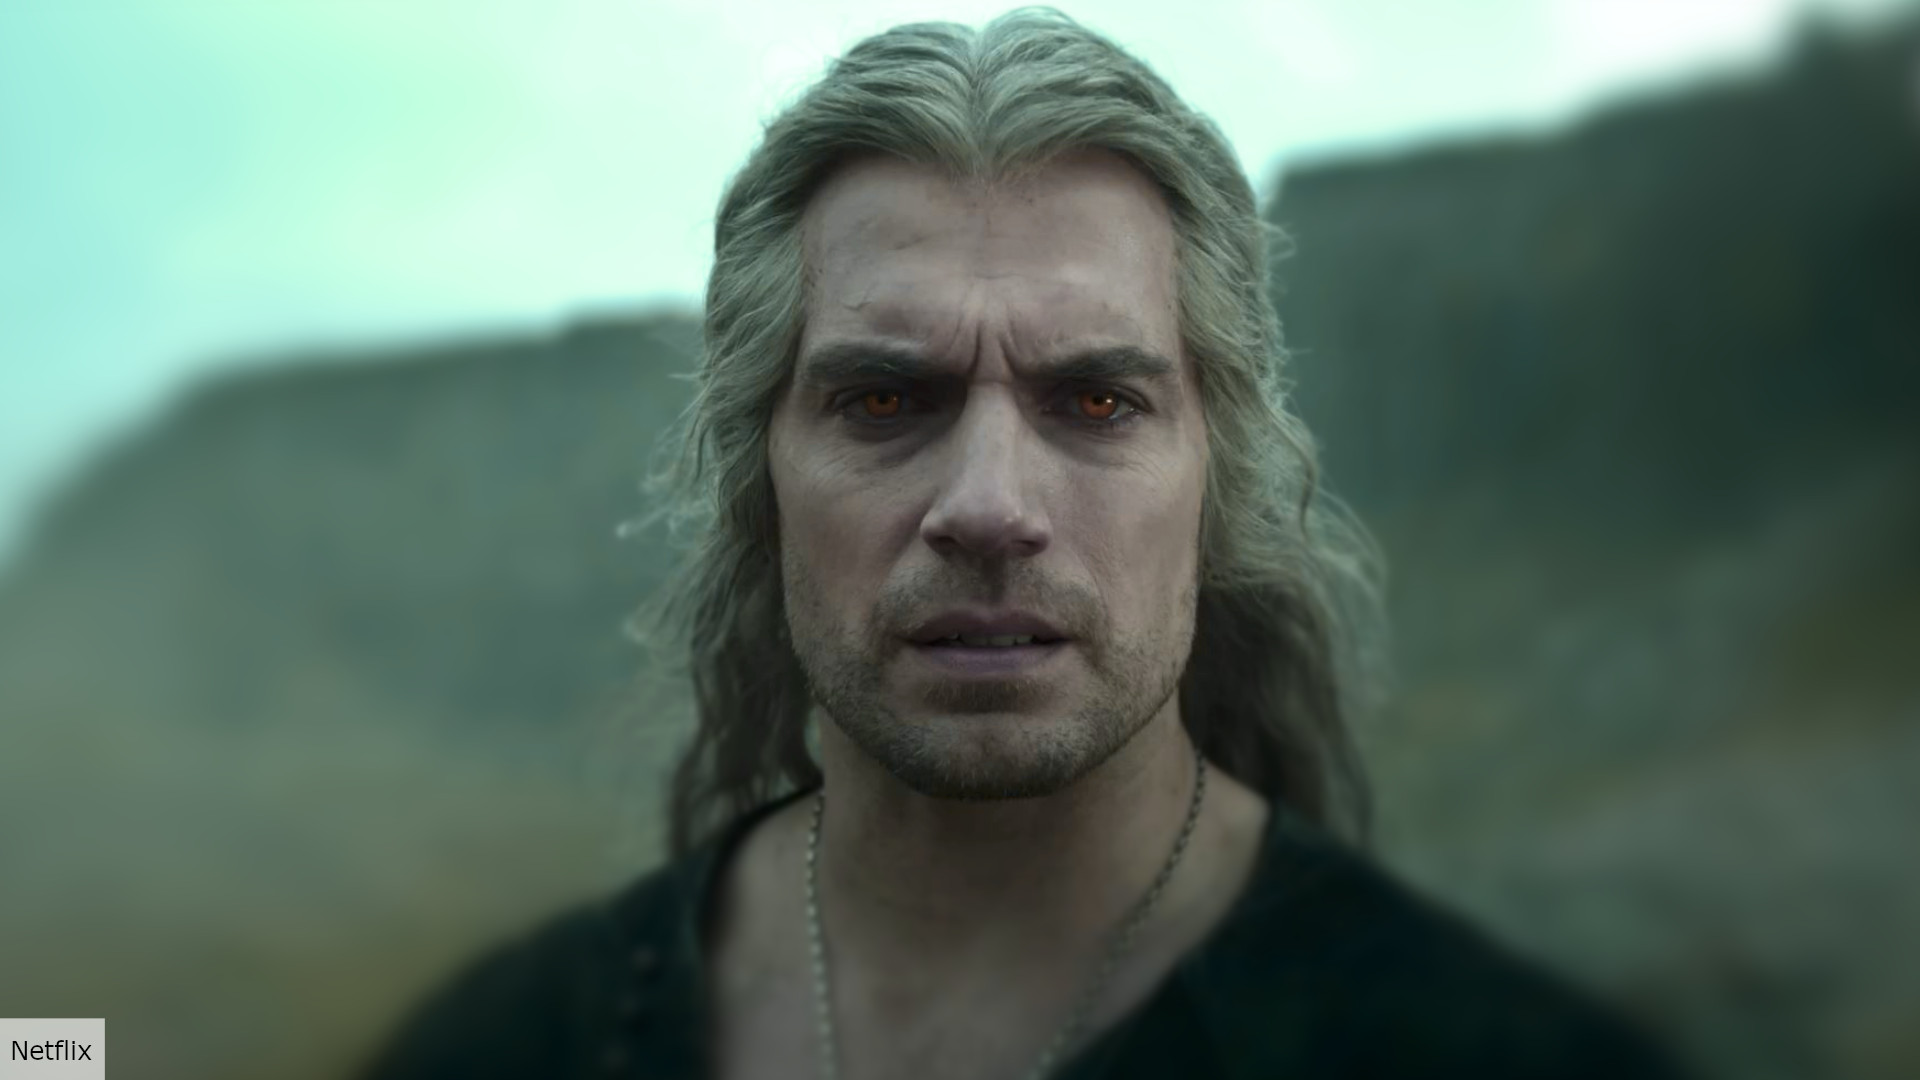 The Witcher Season 4 Release Date, Cast, Plot, Theories & Predictions